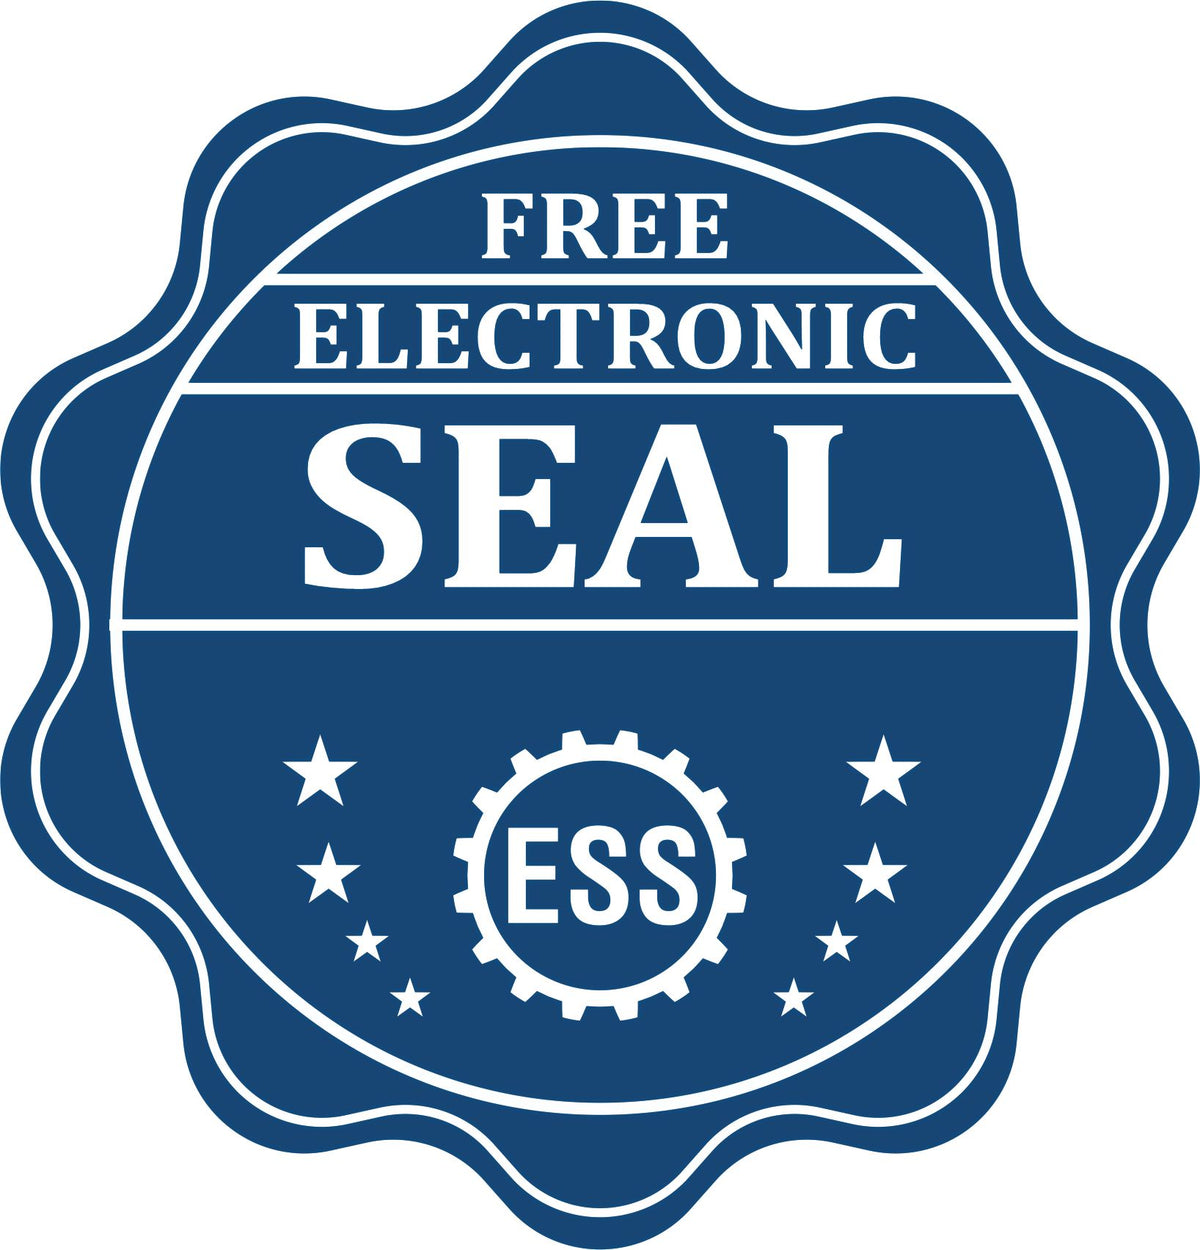 A badge showing a free electronic seal for the Slim Pre-Inked State Seal Notary Stamp for West Virginia with stars and the ESS gear on the emblem.